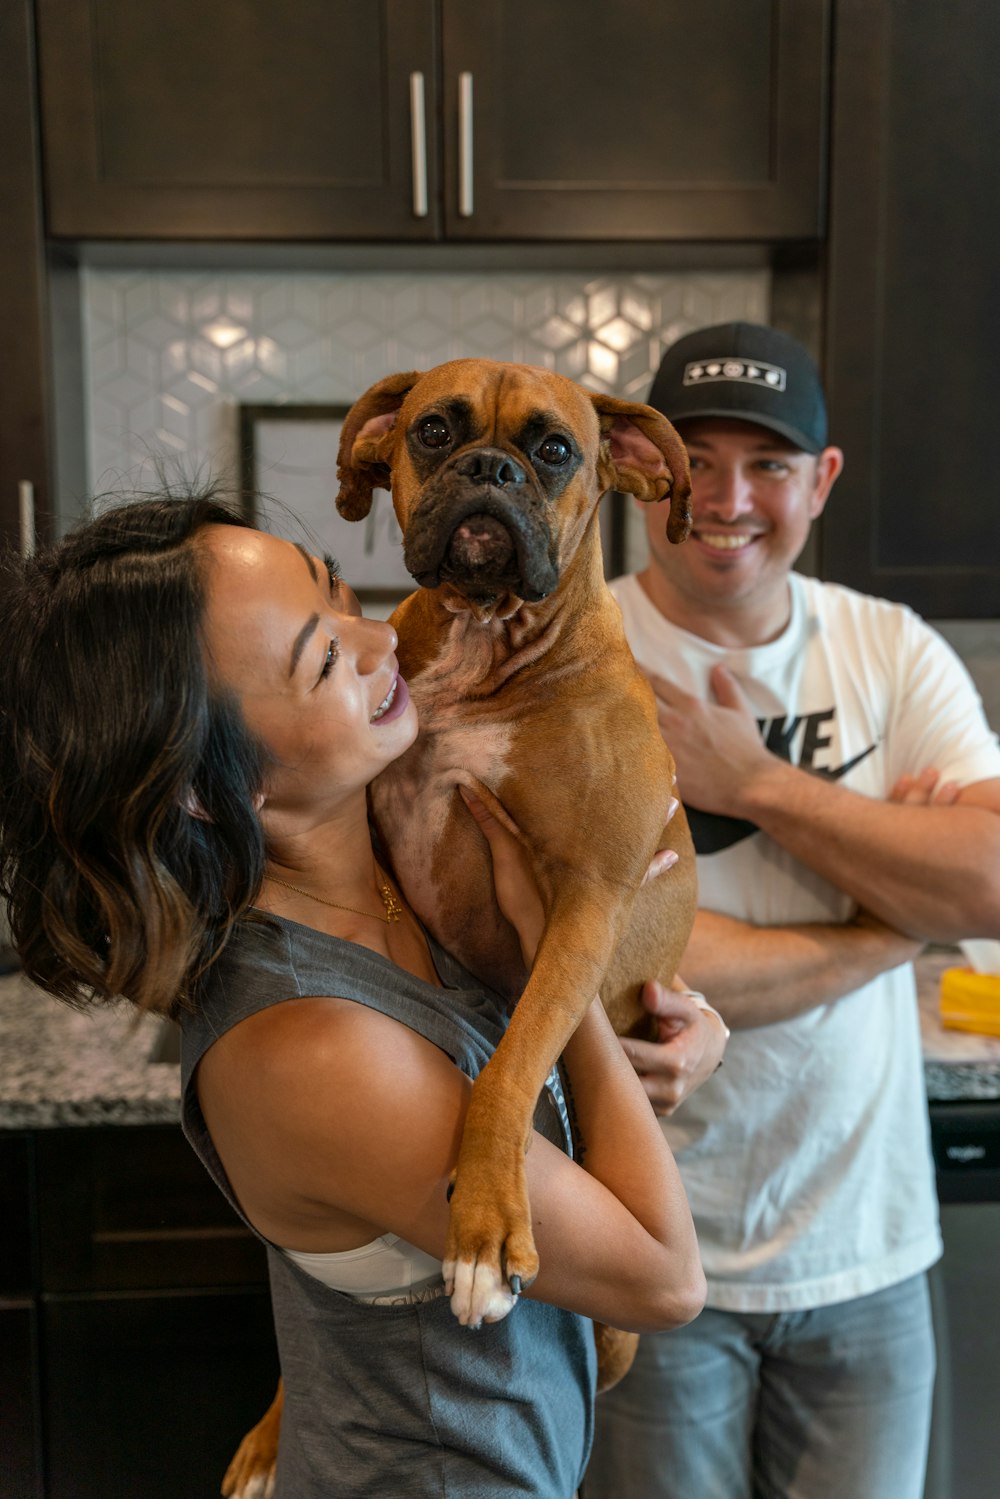 a man and a woman holding a dog in a kitchen